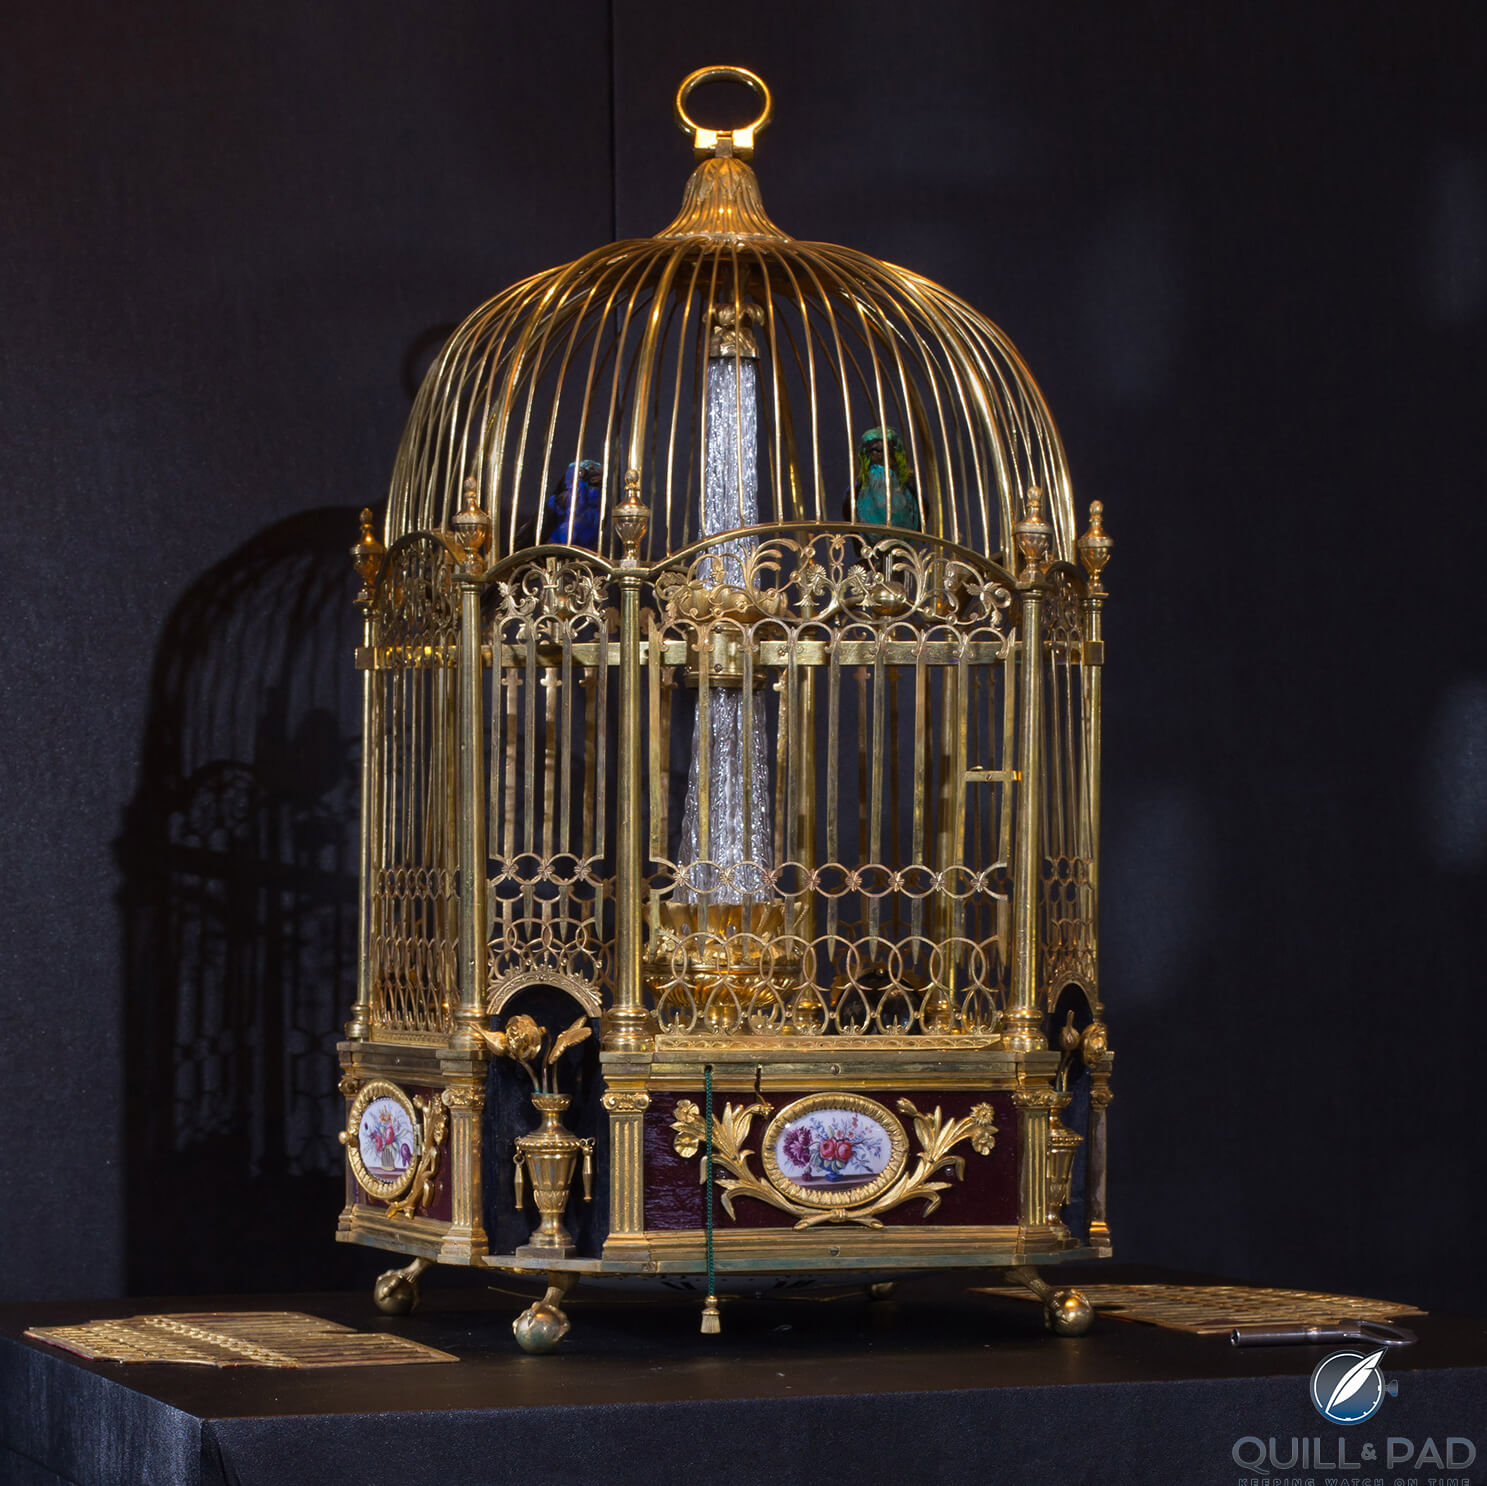 A vintage Jaquet Droz singing bird in cage on display in China in 2011